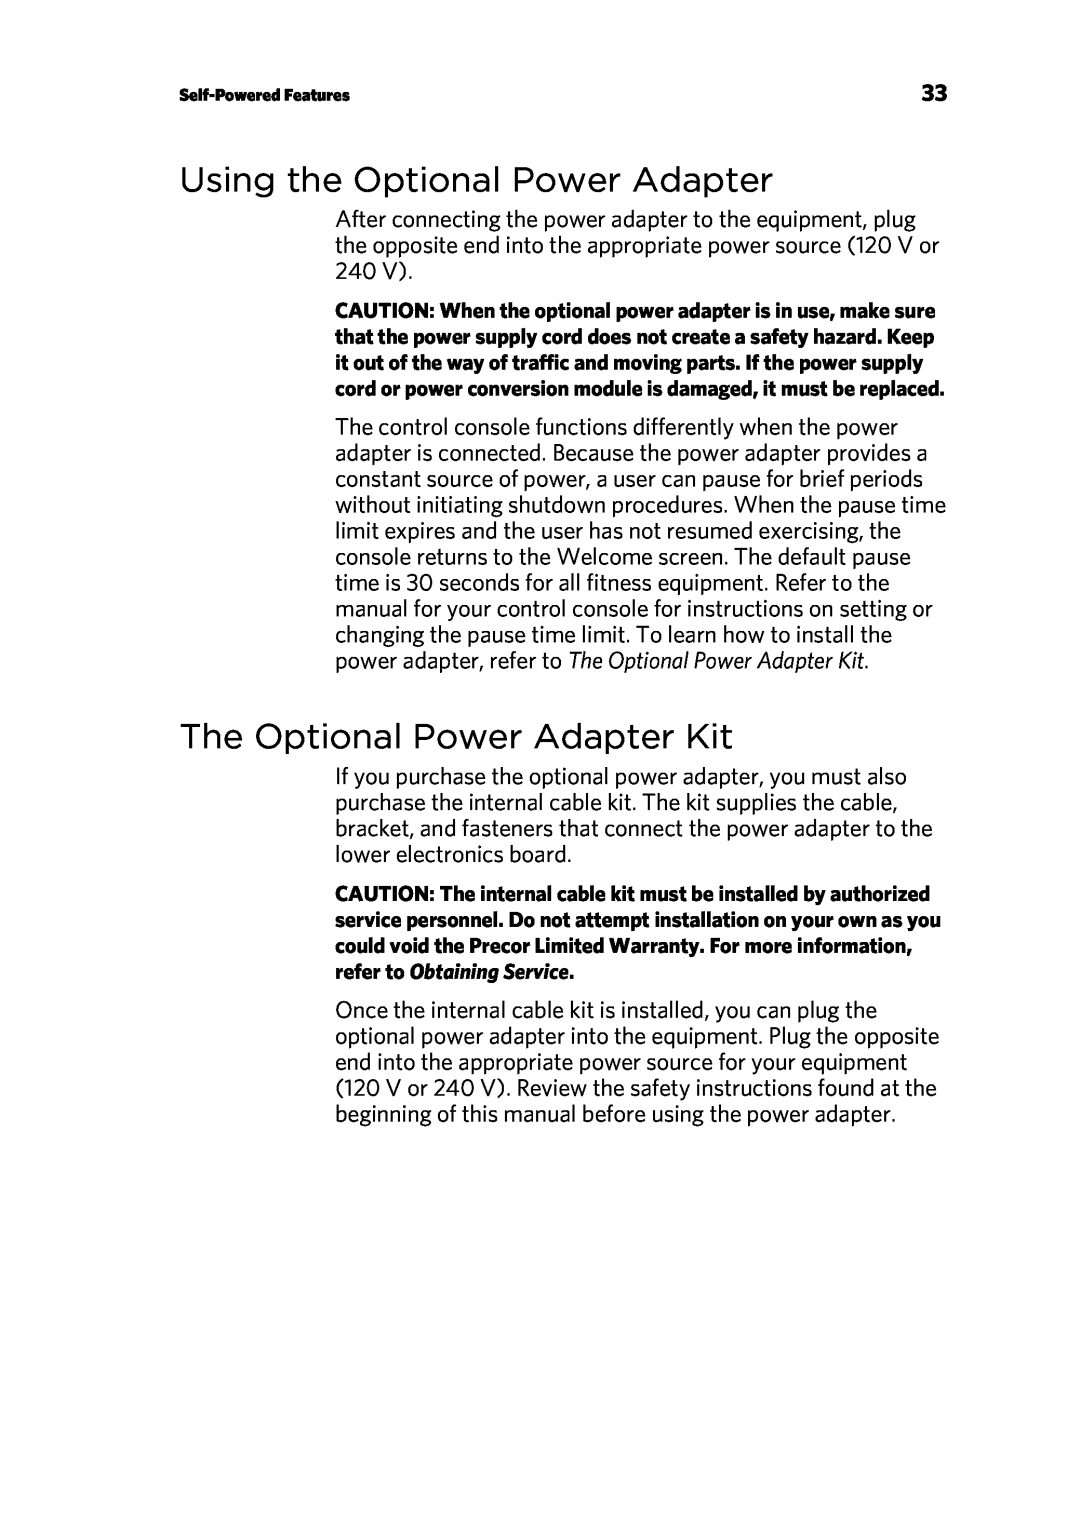 Precor 300753-201 manual Using the Optional Power Adapter, The Optional Power Adapter Kit, Self-Powered Features 